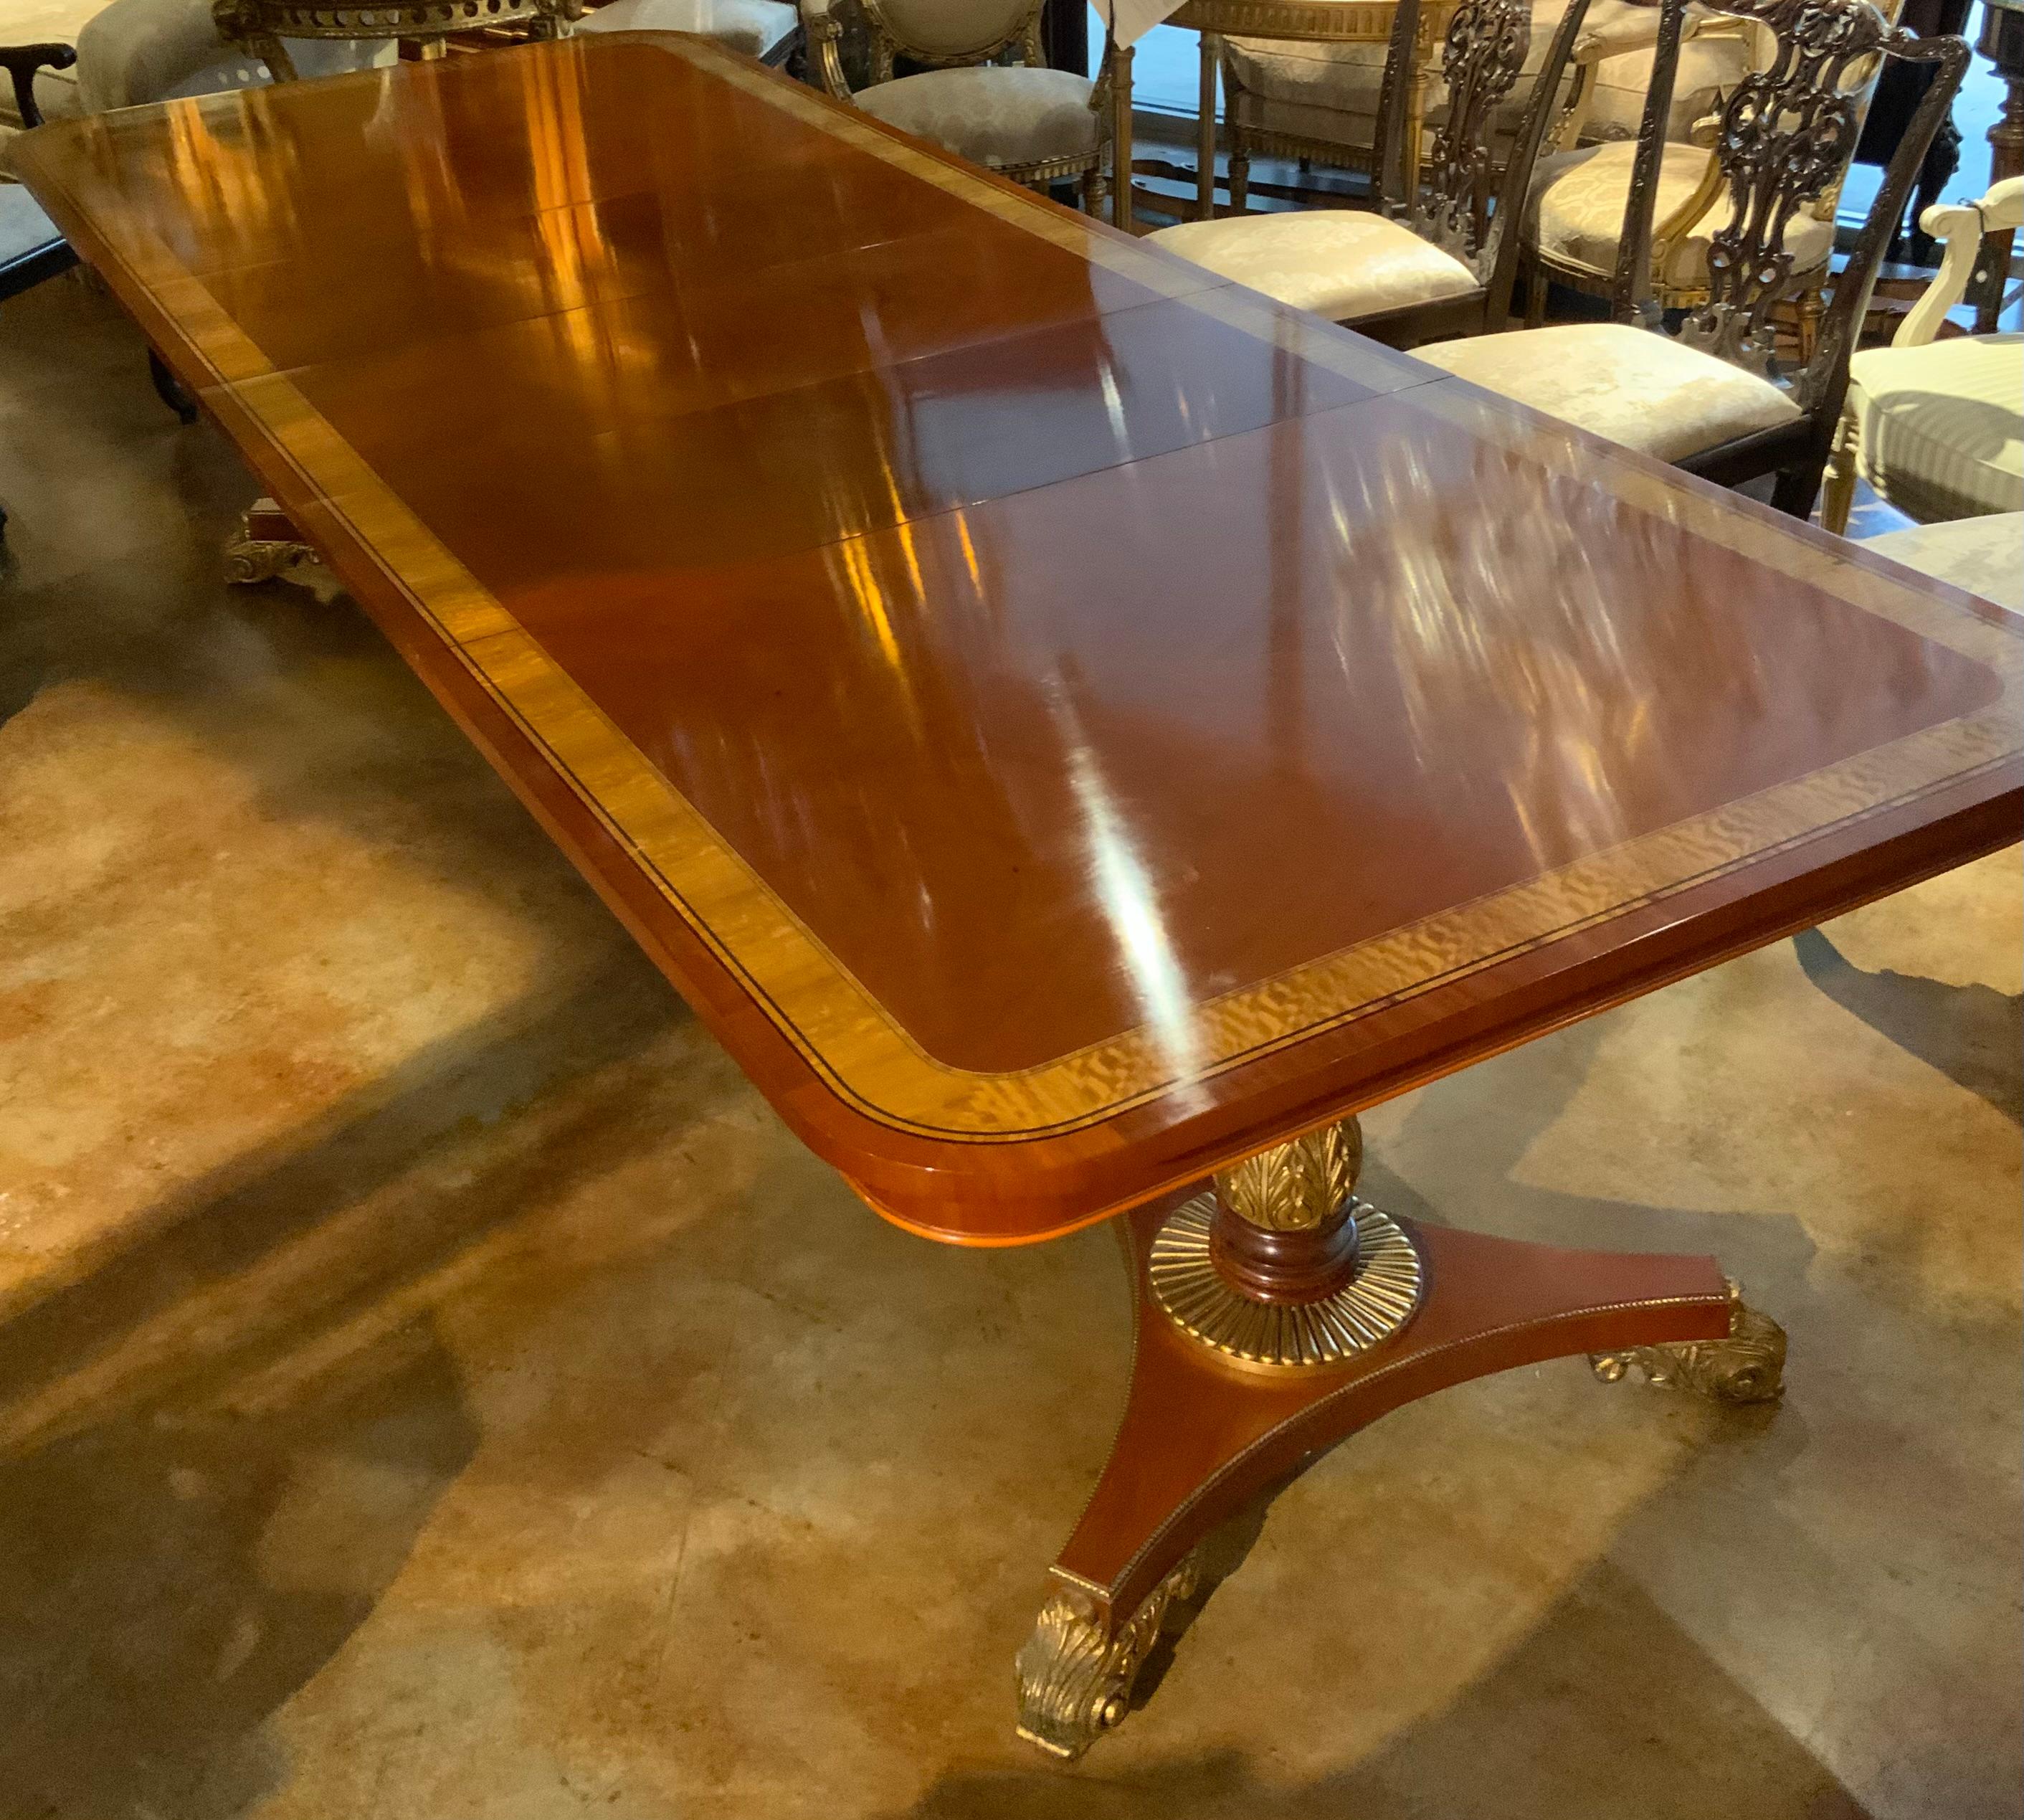 This table is very well made and has three leaves so that it is adaptable 
In size to personal needs. The top is rounded at the ends and has
Banding in satinwood. It is supported with two pedestals , each with a foliate-carved columnar standard with